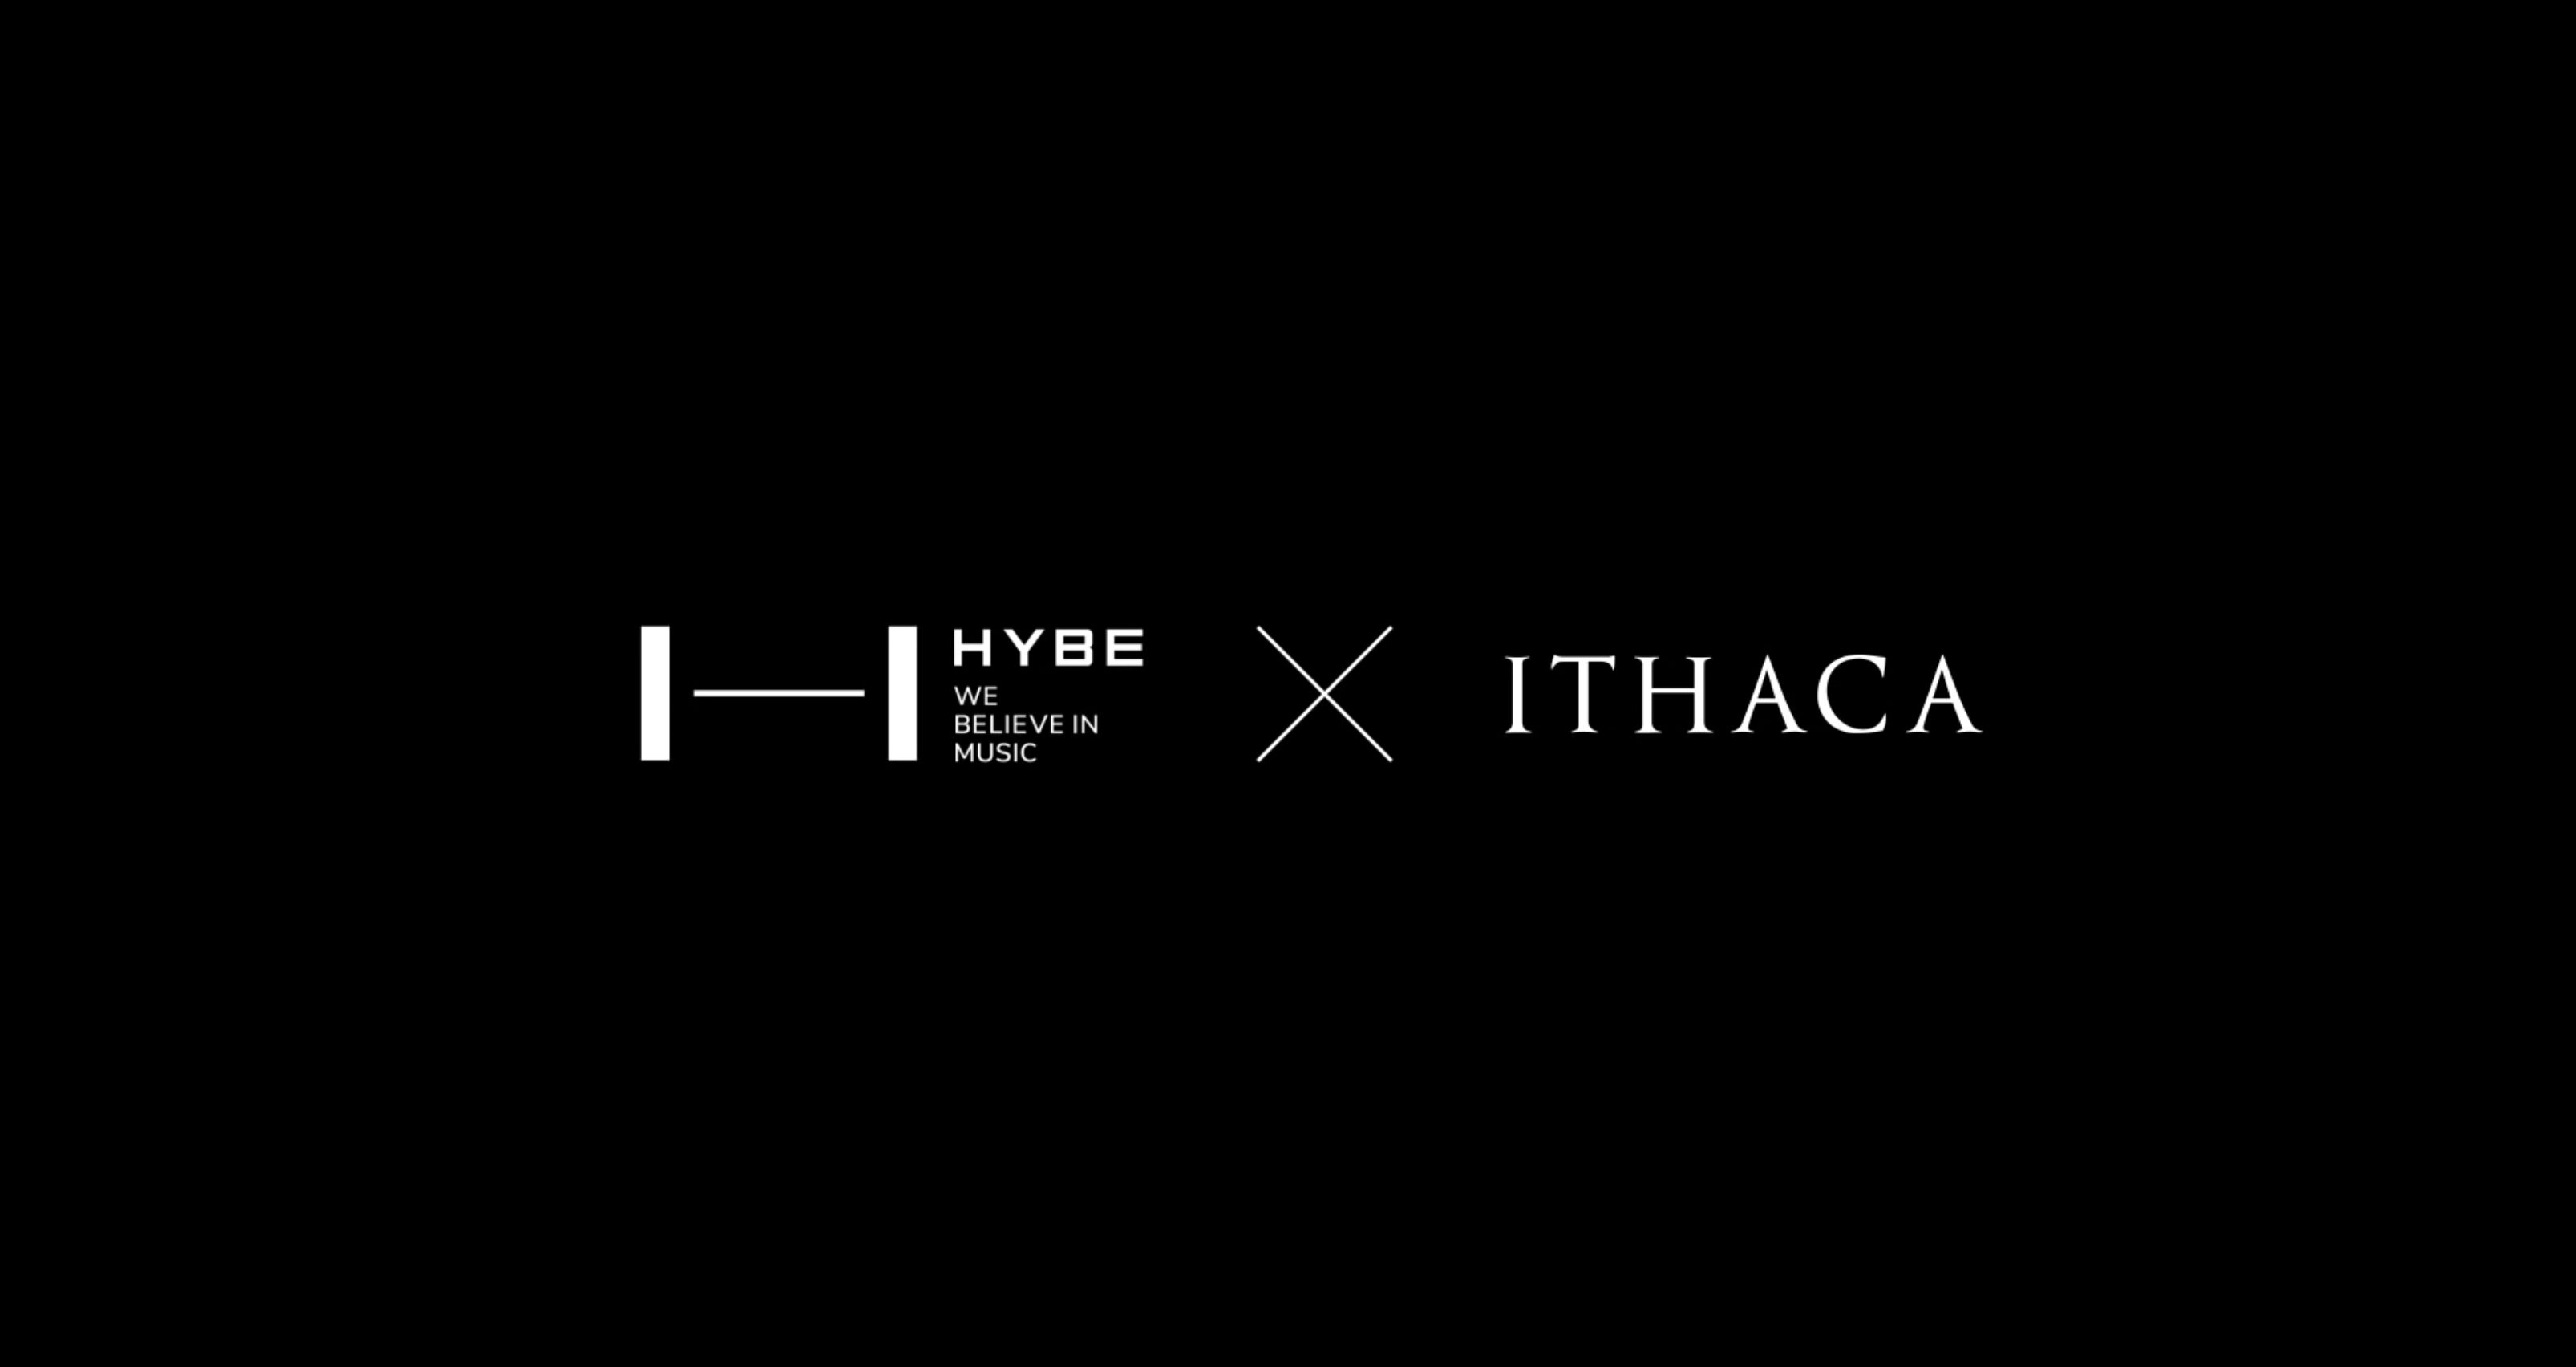 South Korean Record Label Hybe Purchases Ithaca